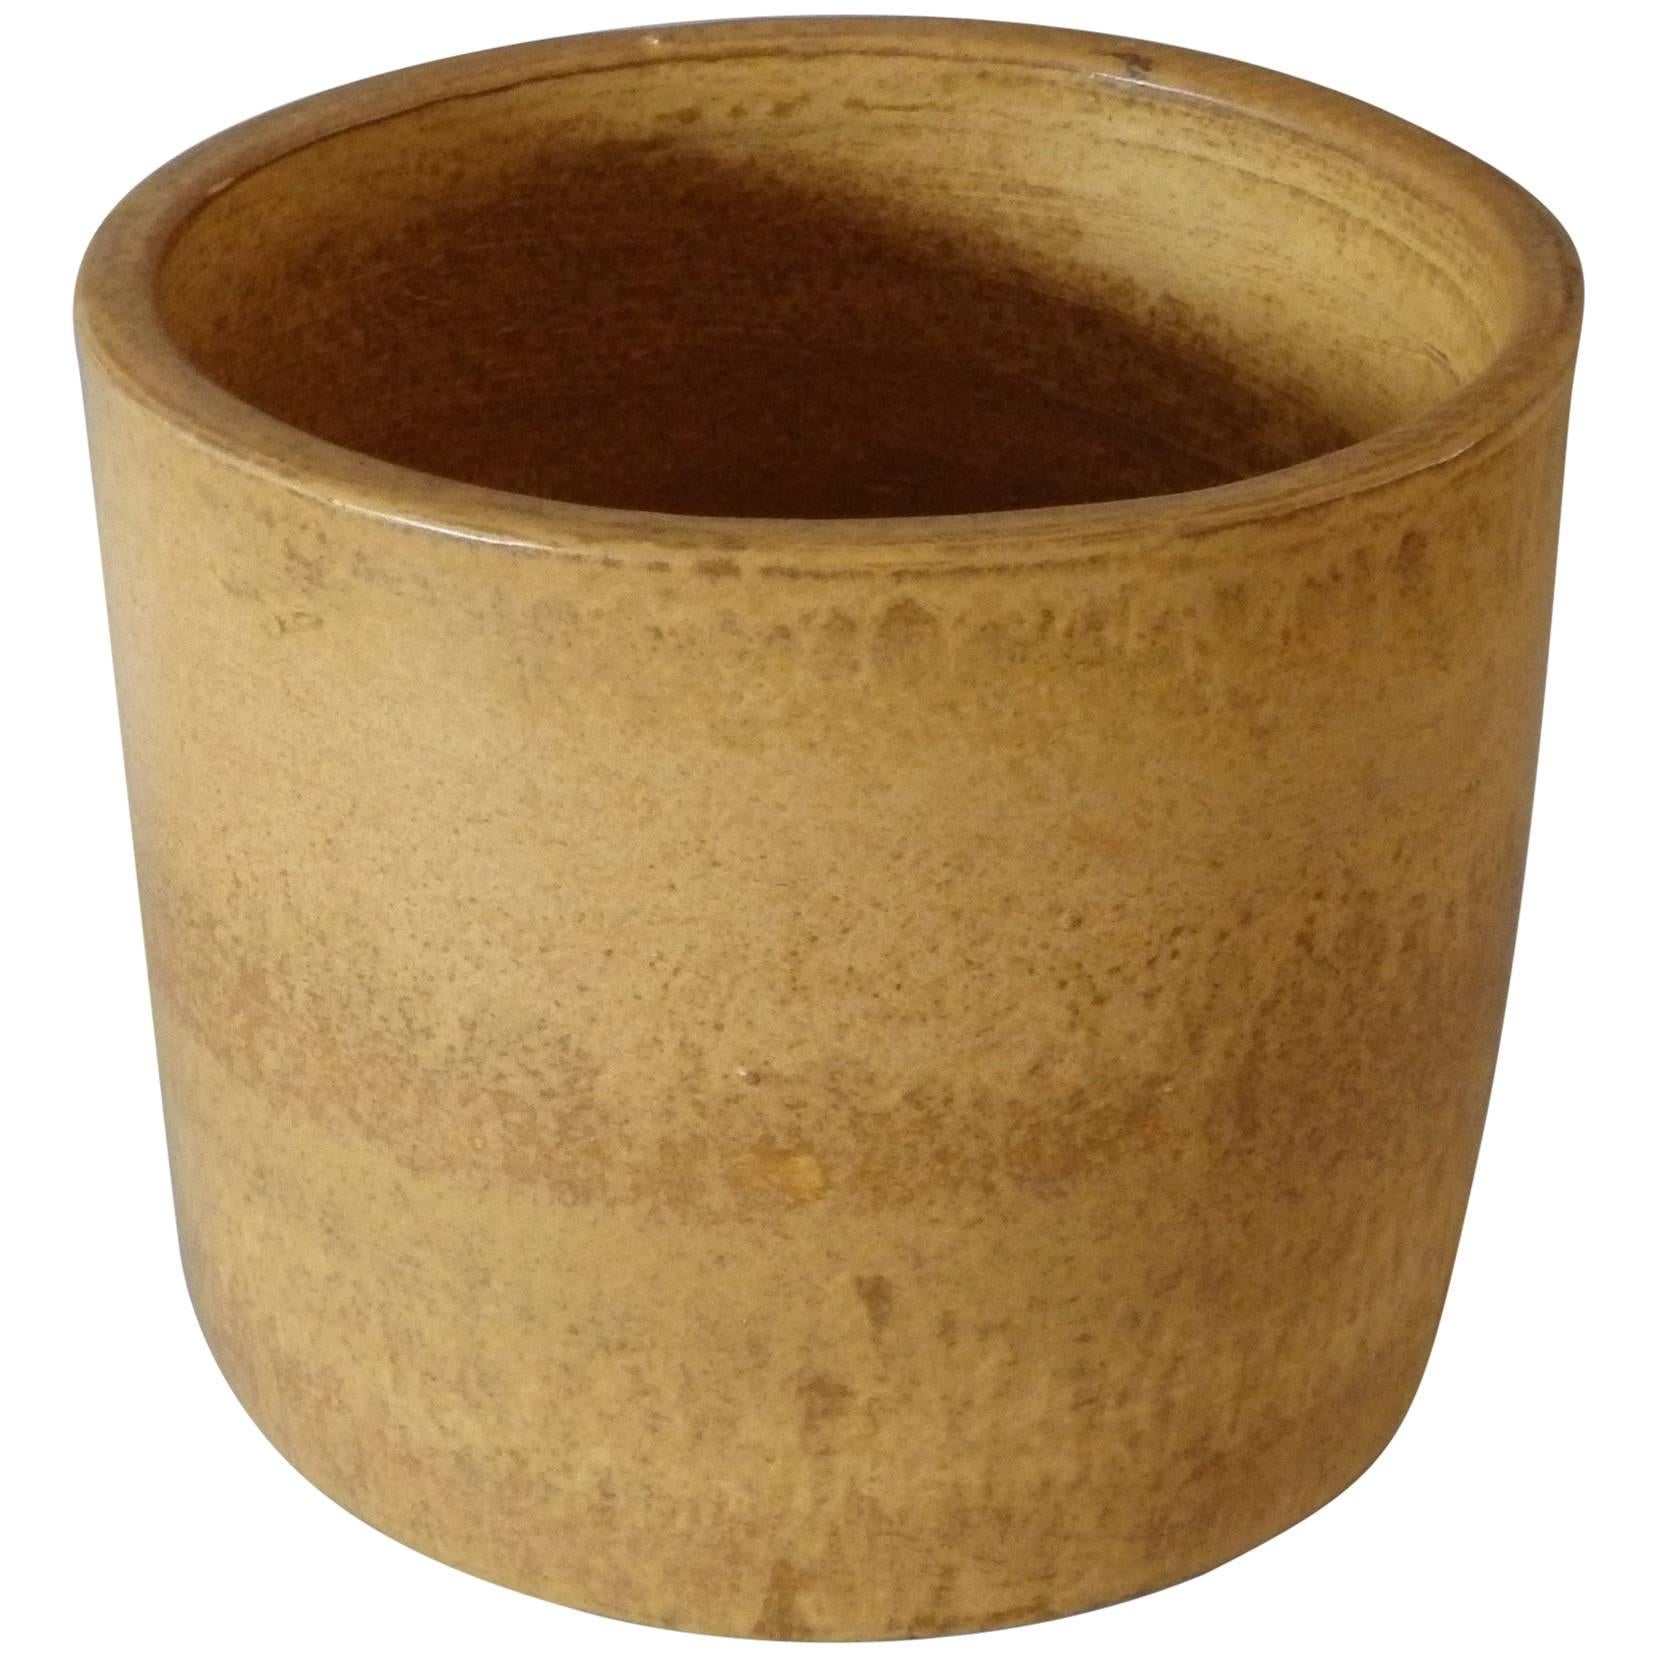 Architectural Pottery Style Cylinder Planter Pot